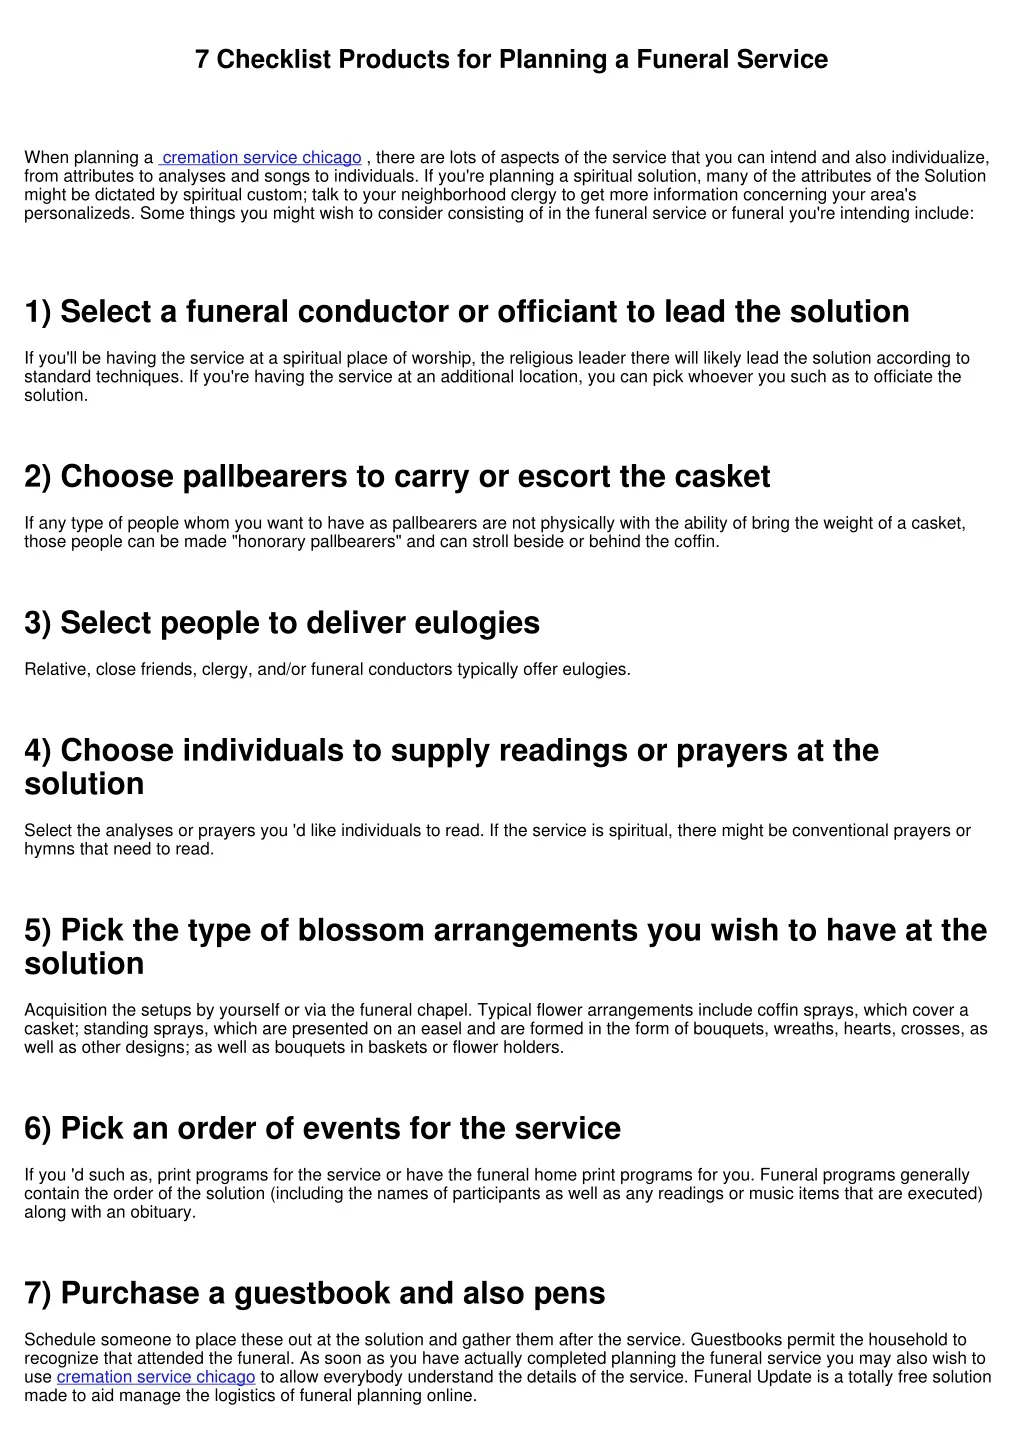 7 checklist products for planning a funeral